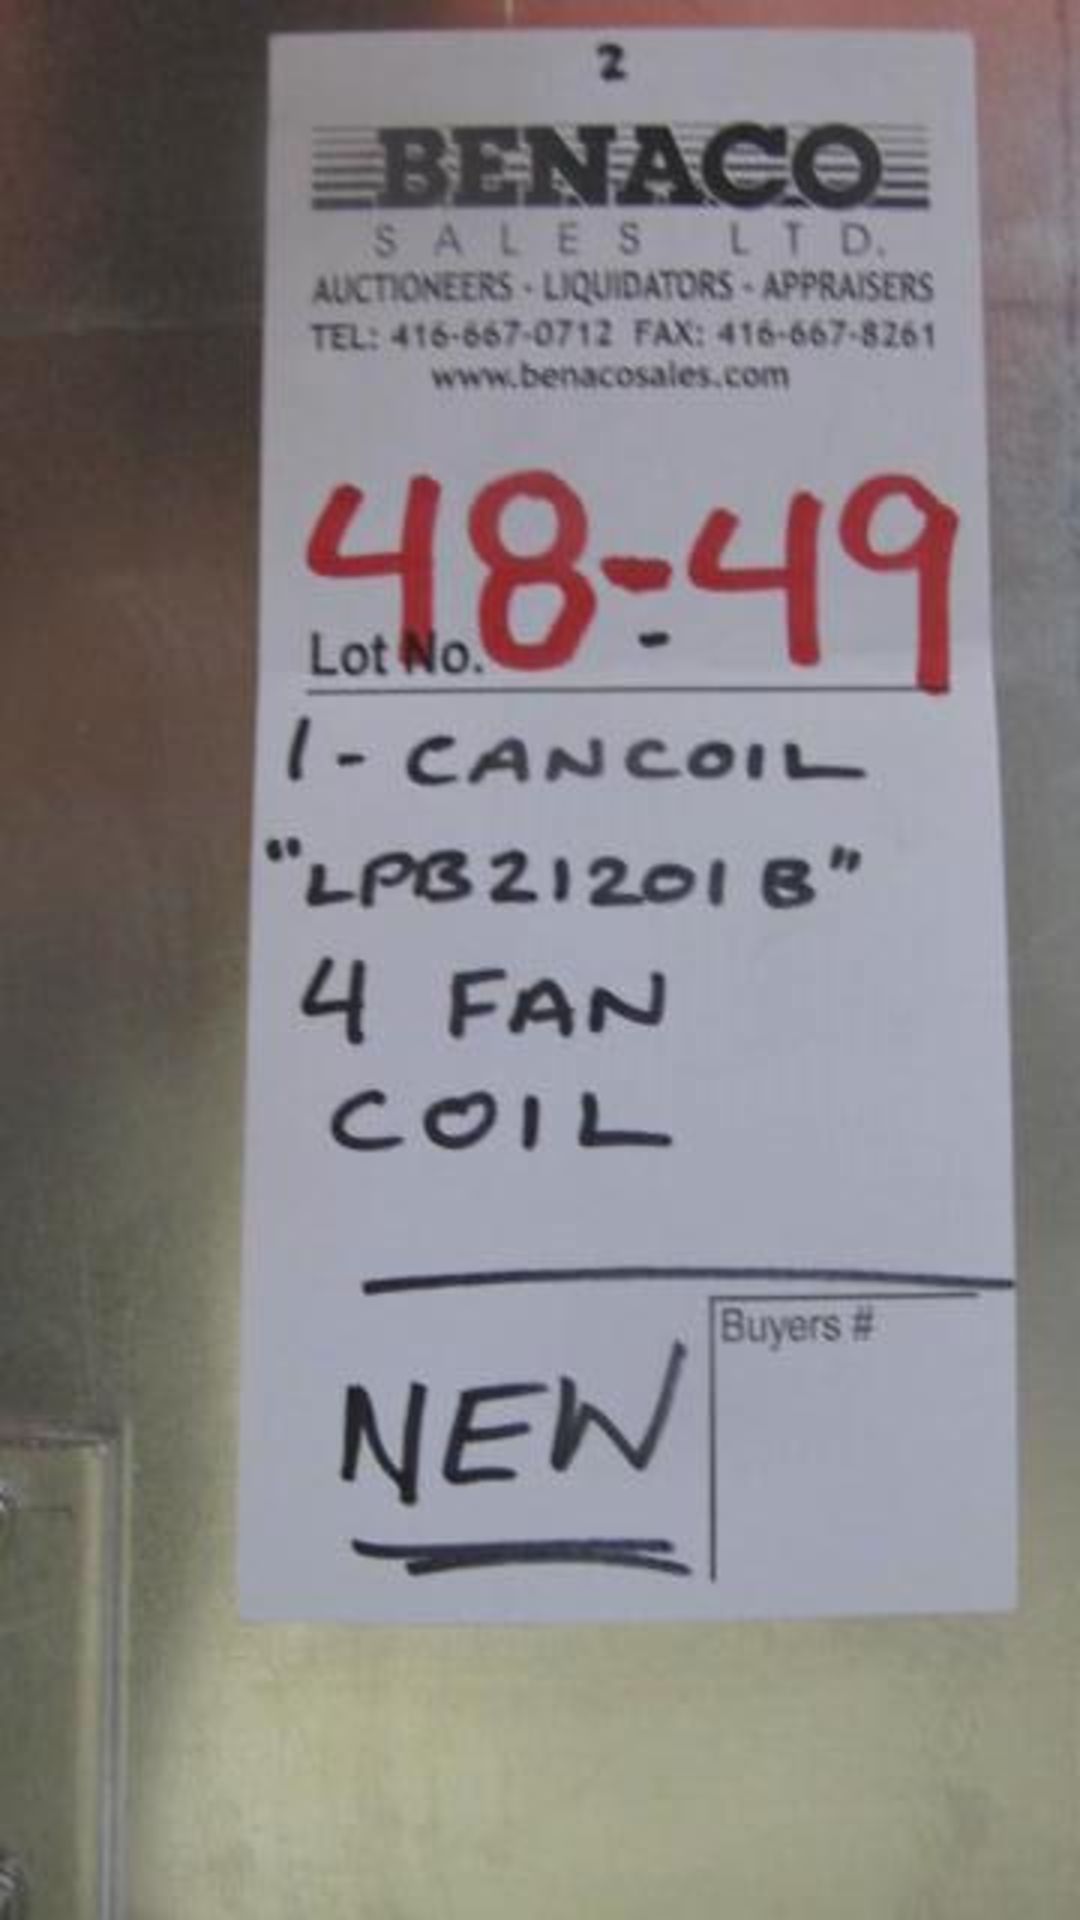 1X, NEW CANCOIL LPB21201B, 4 FAN COIL - Image 5 of 5